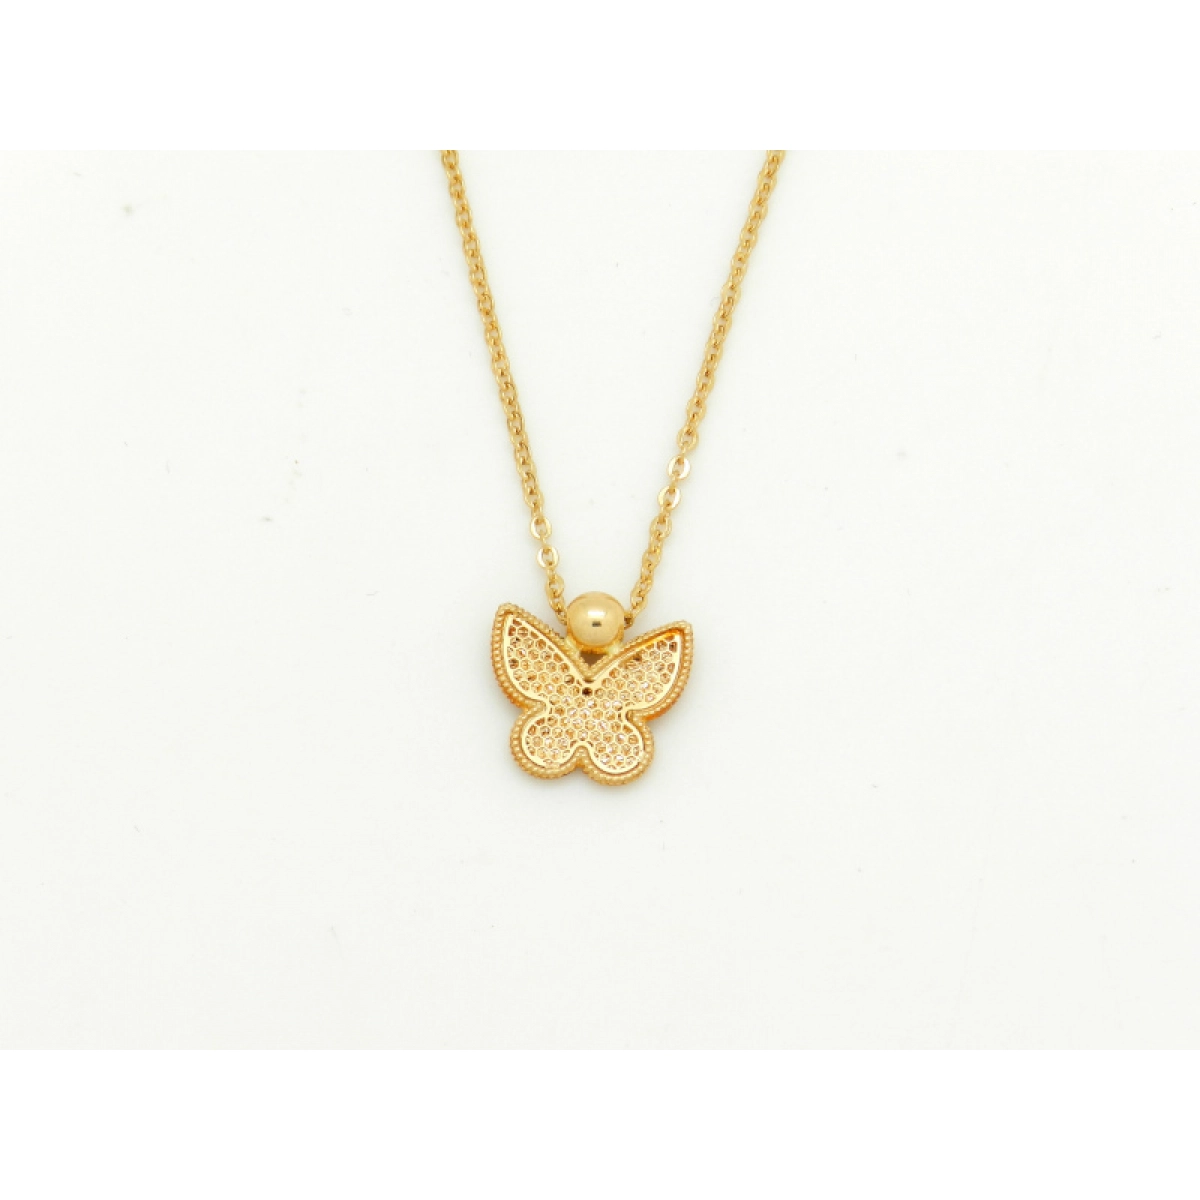 COLLAR CHOKER NECKLACE GOLD BUTTERFLY - OWN - AG8609